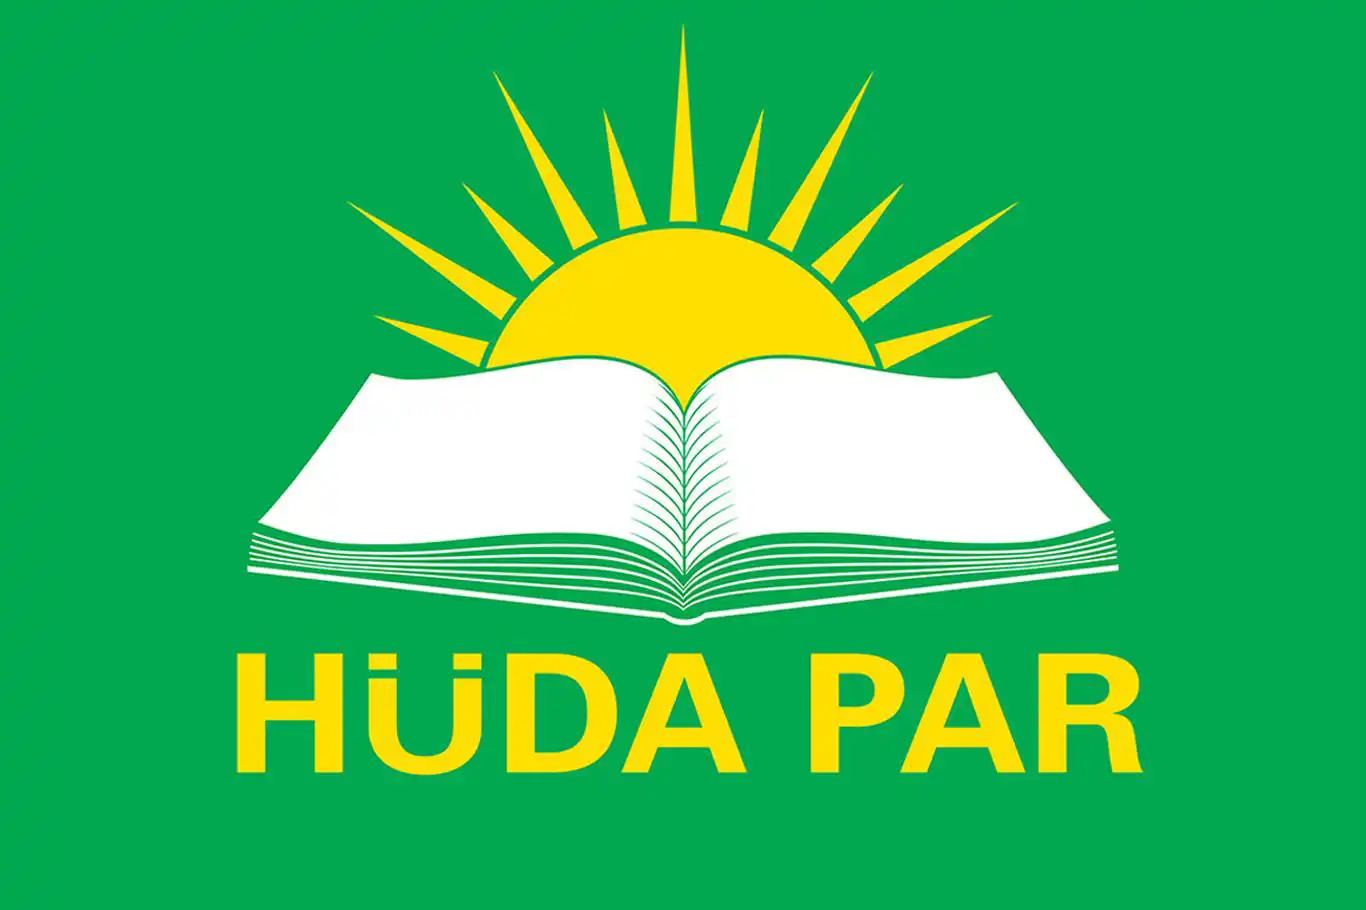 HÜDA PAR calls for action against companies supporting zionist regime